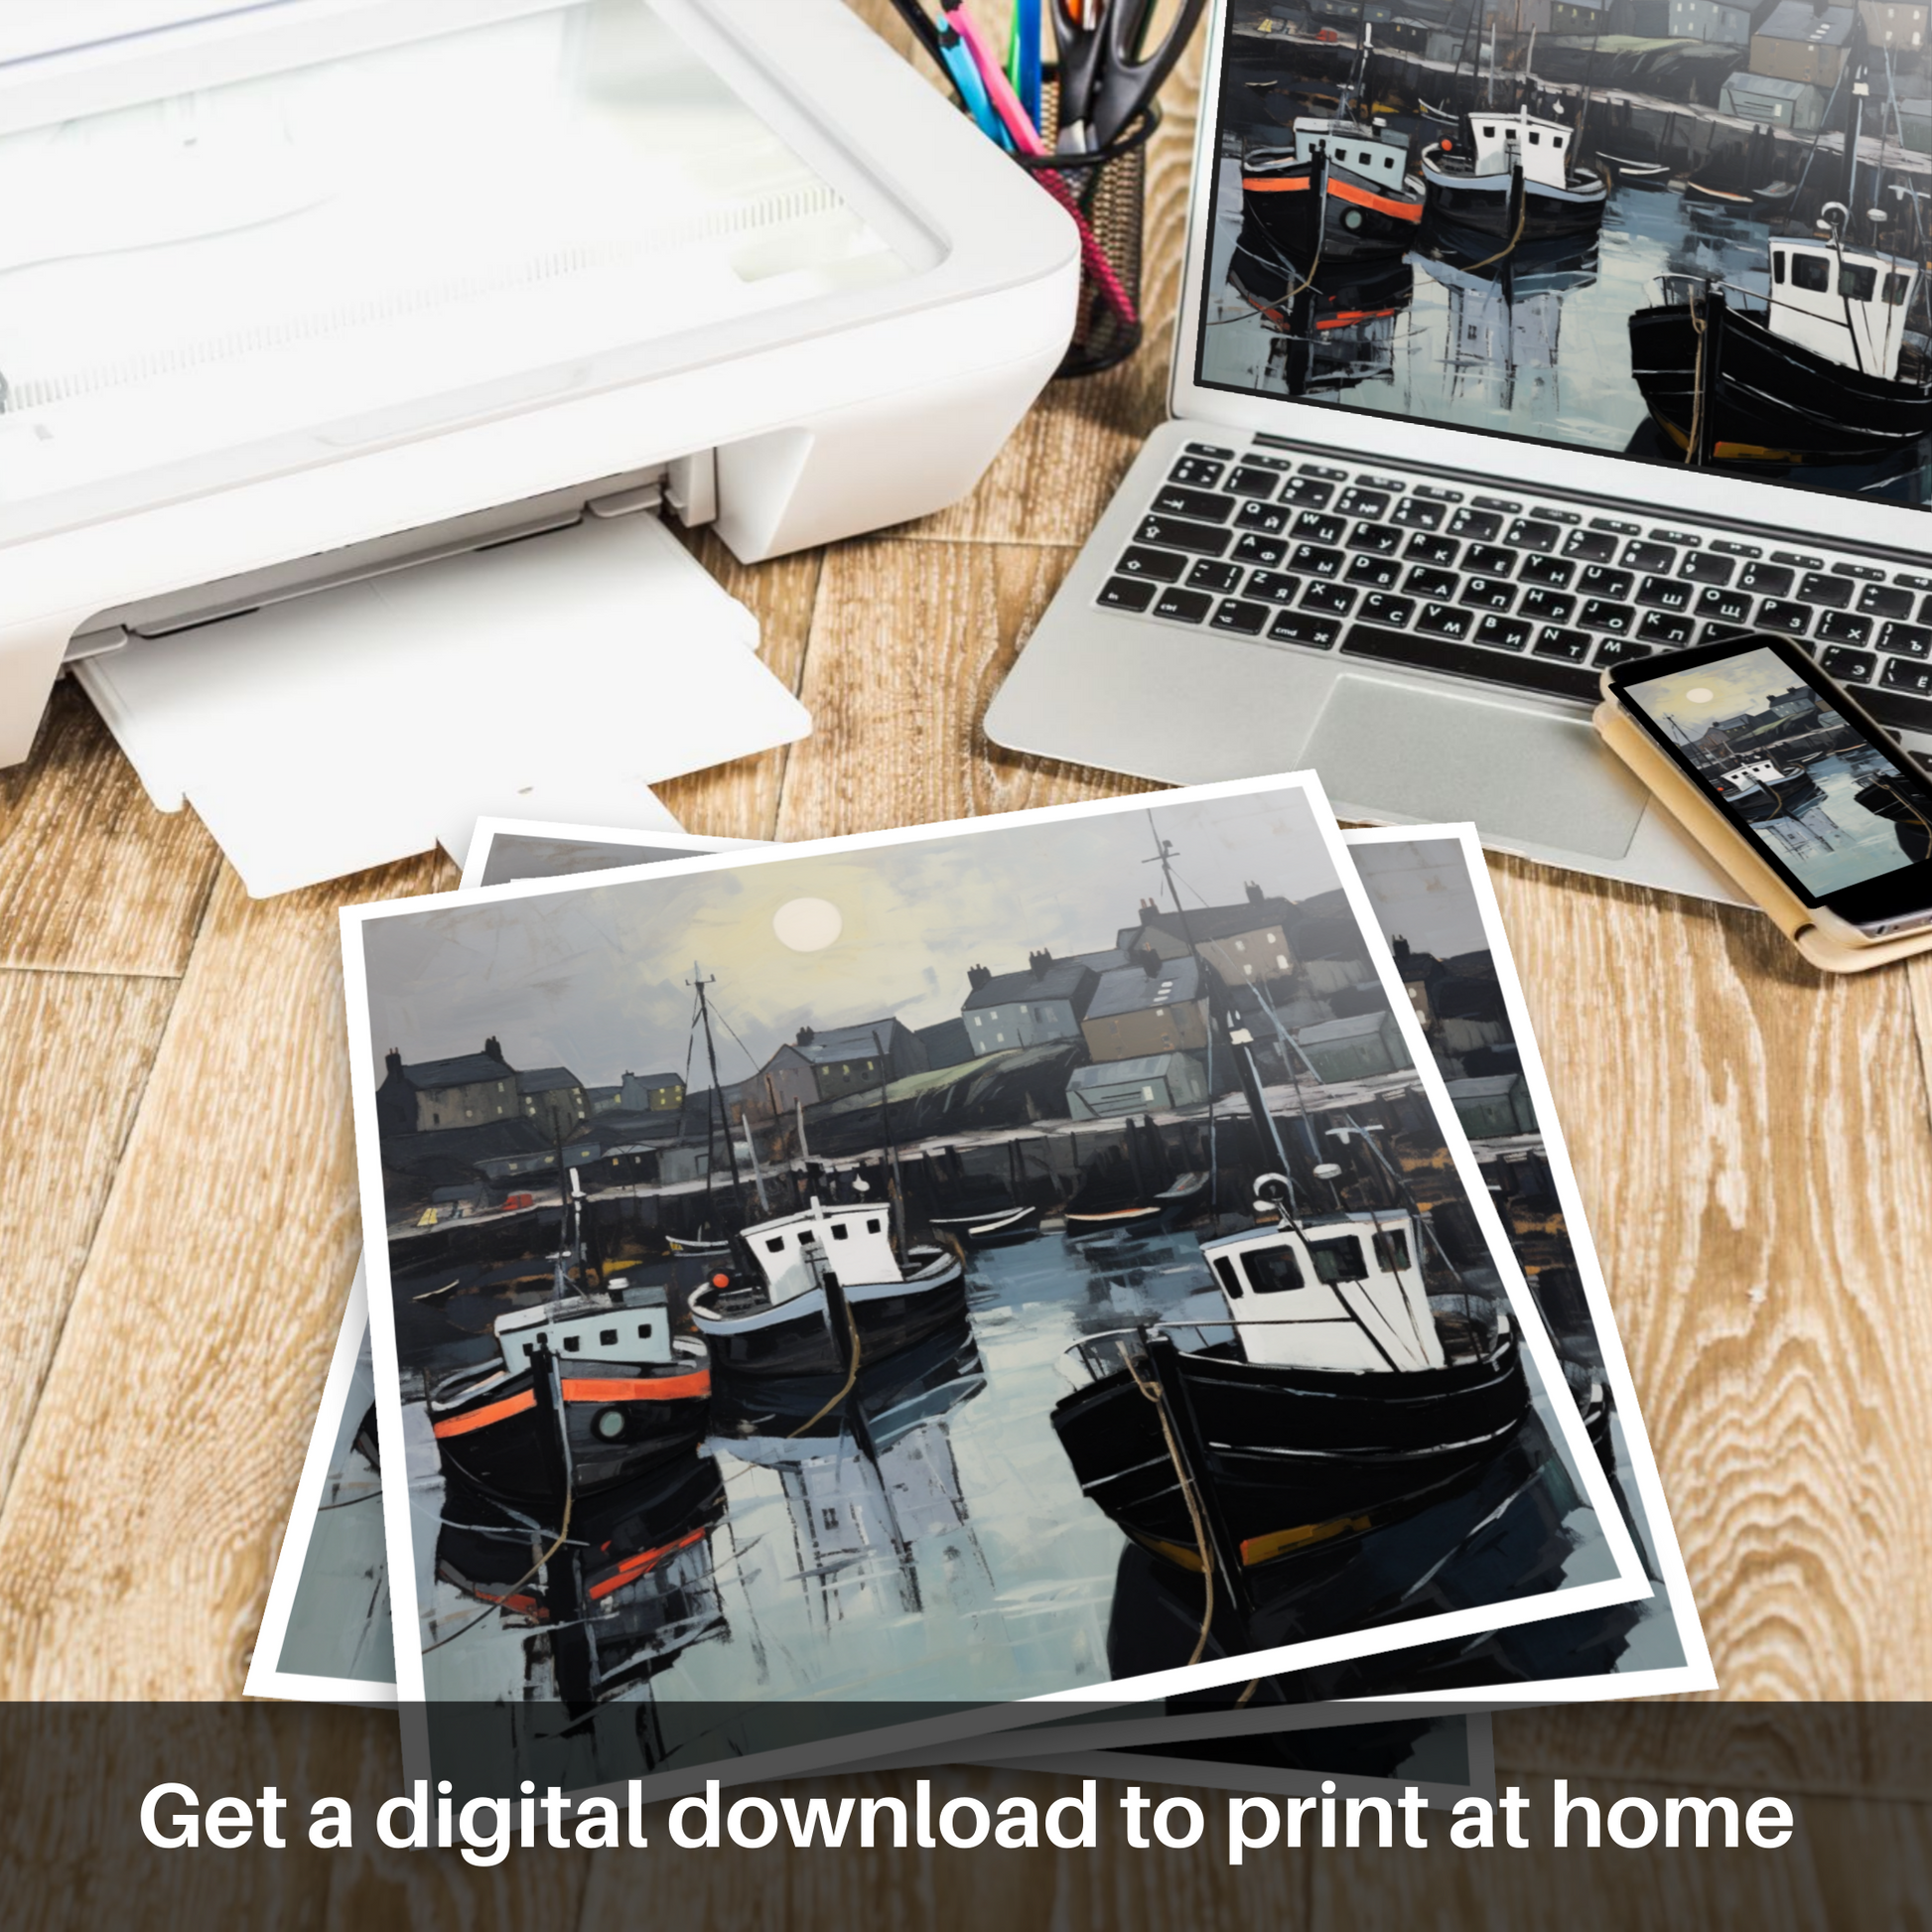 Downloadable and printable picture of Eyemouth Harbour